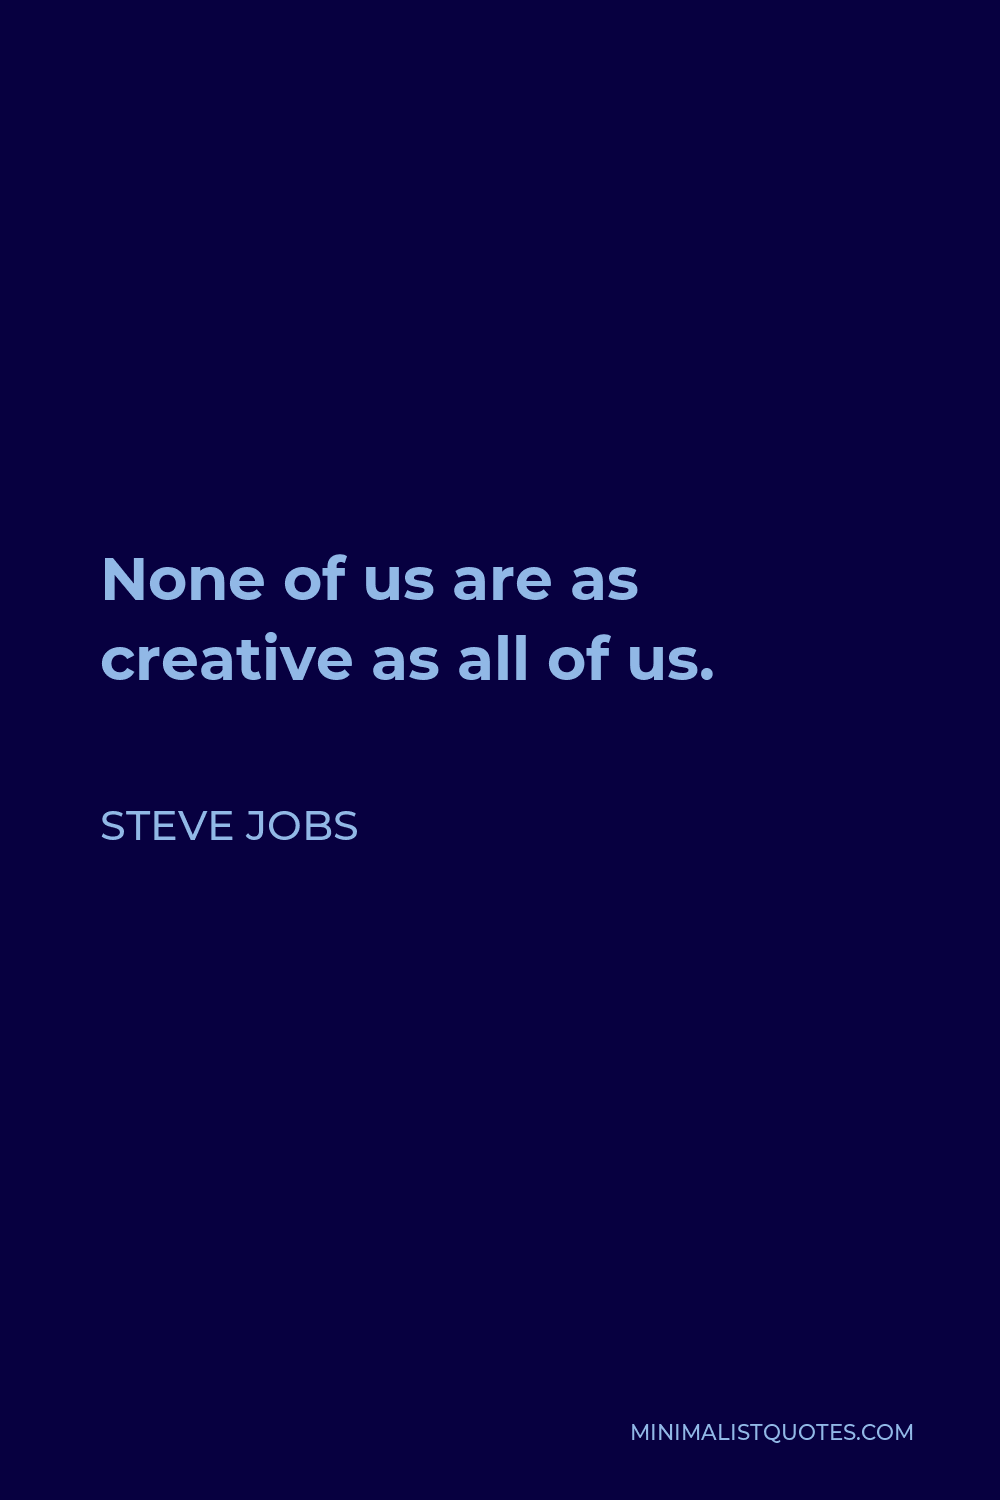 Steve Jobs Quote - None of us are as creative as all of us.